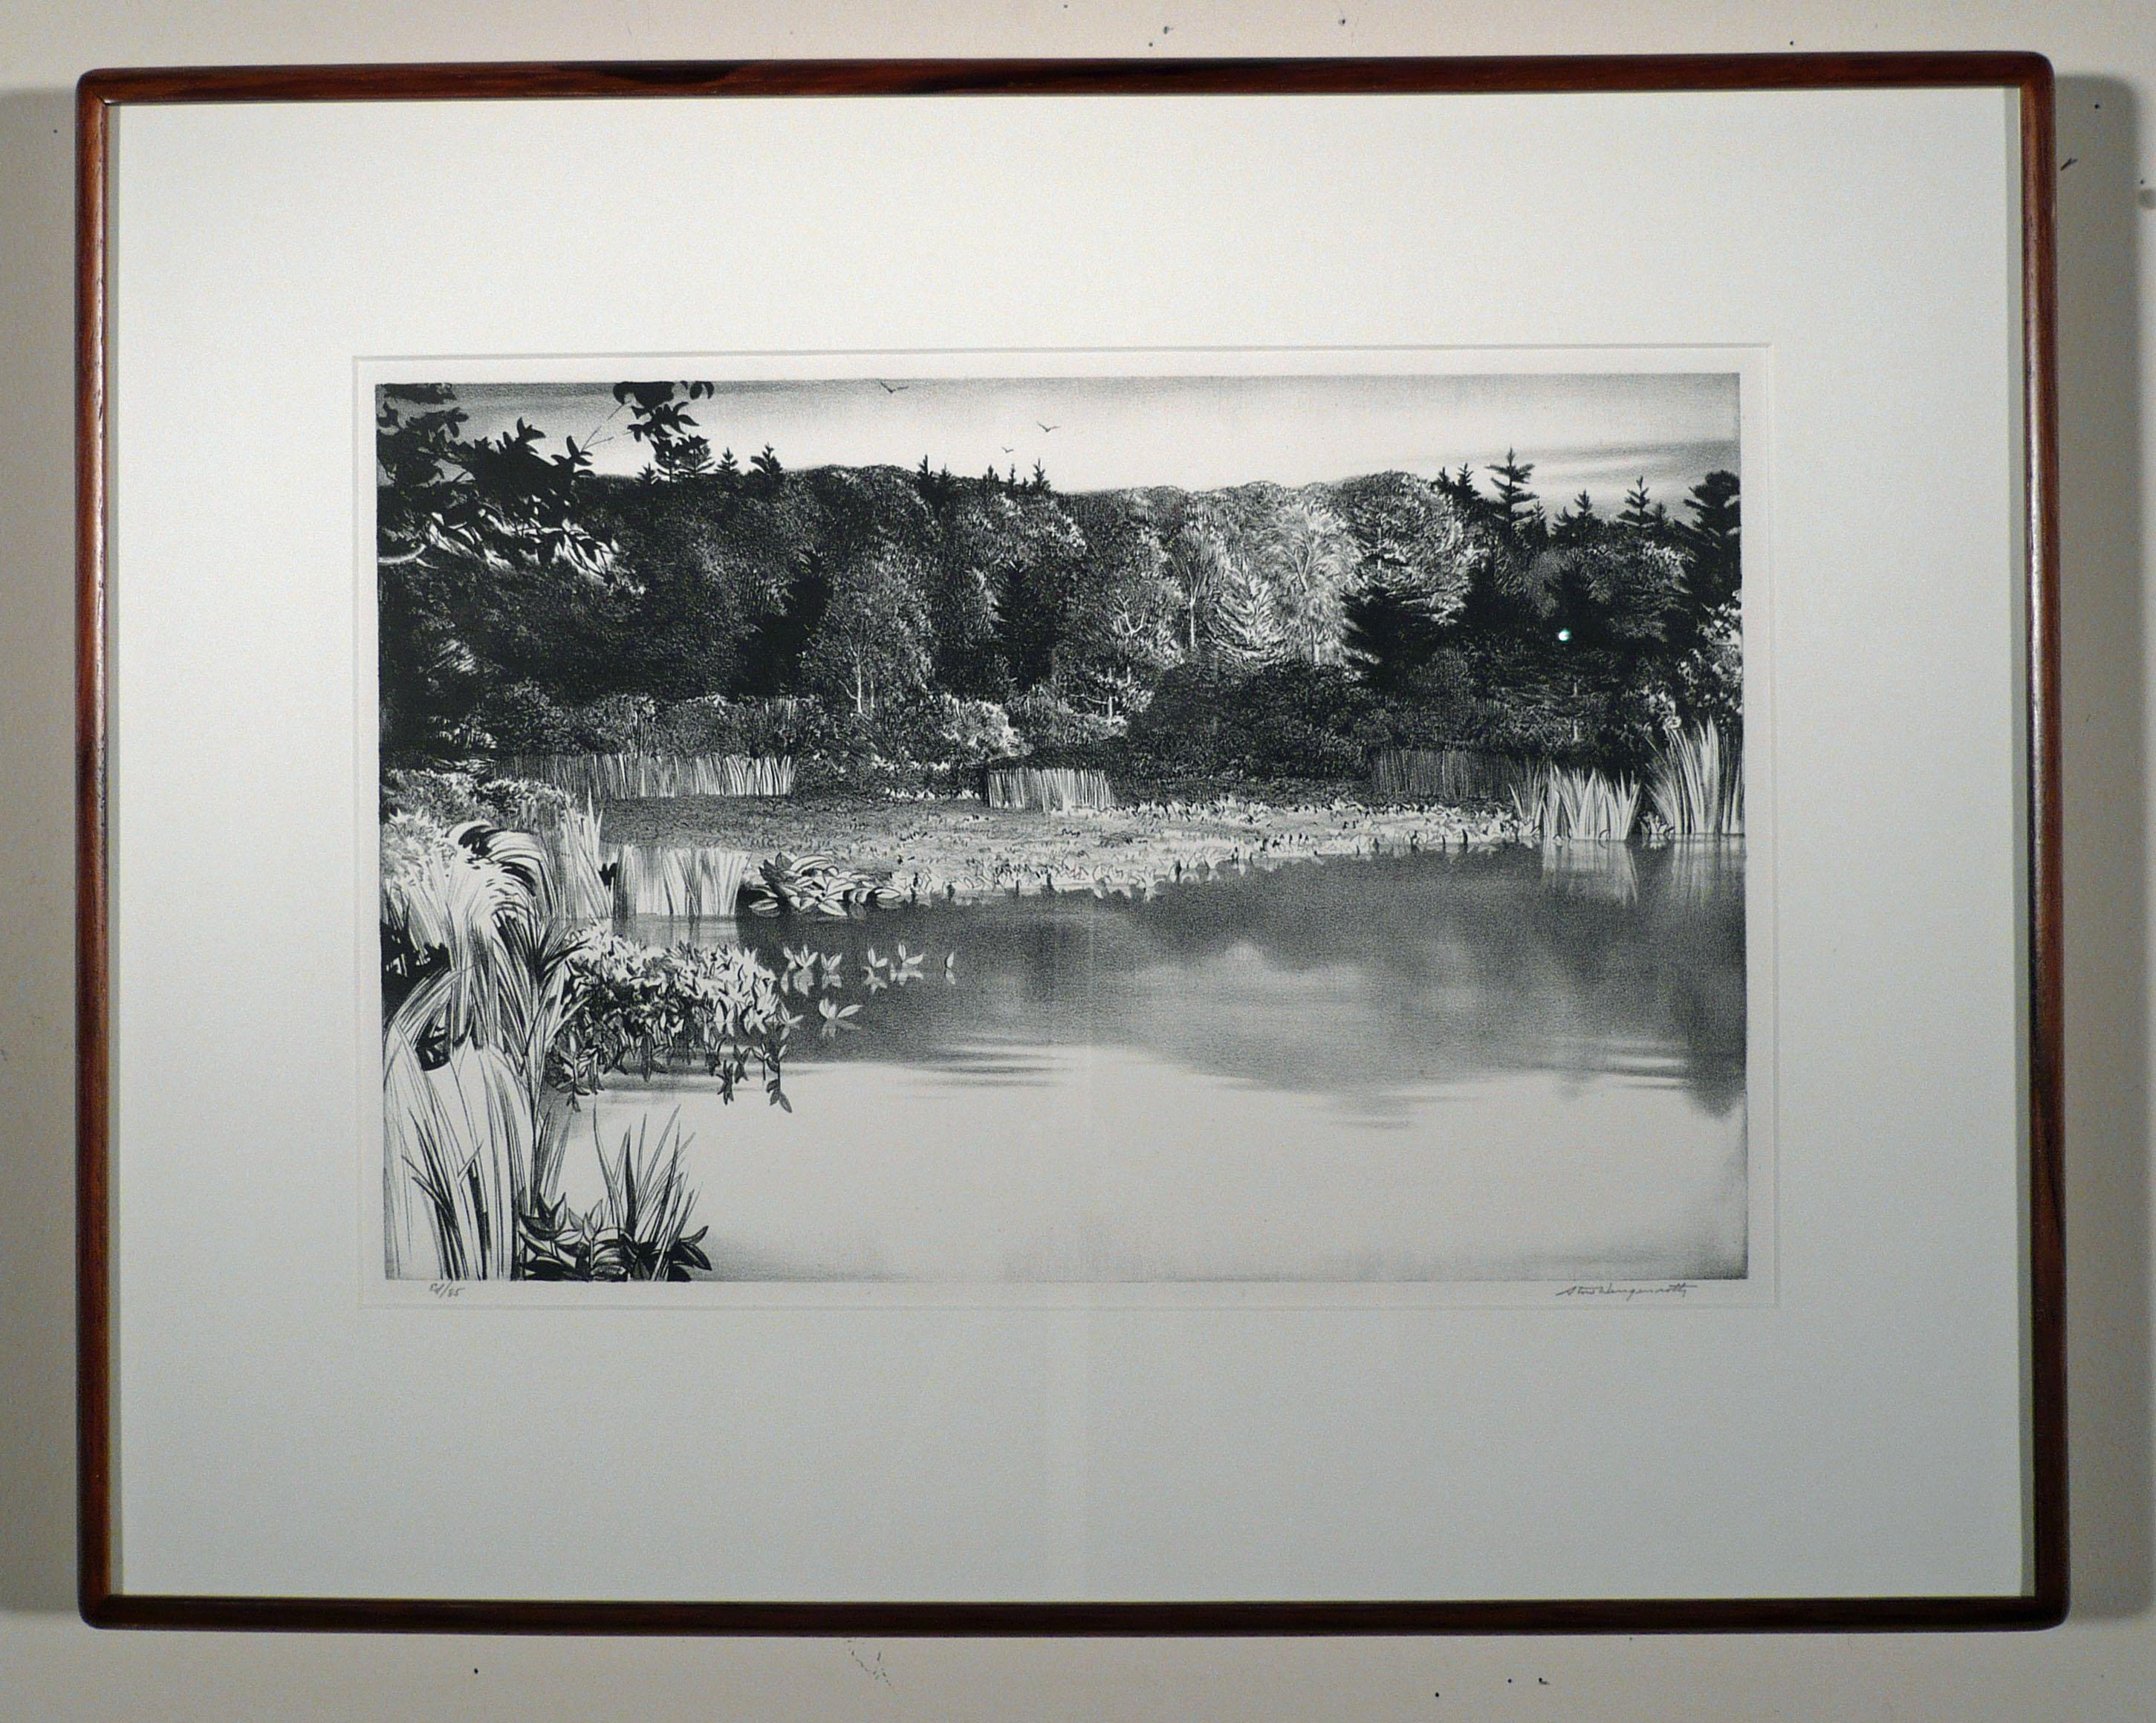 QUIET POND, MONHEGAN, MAINE - Print by Stow Wengenroth